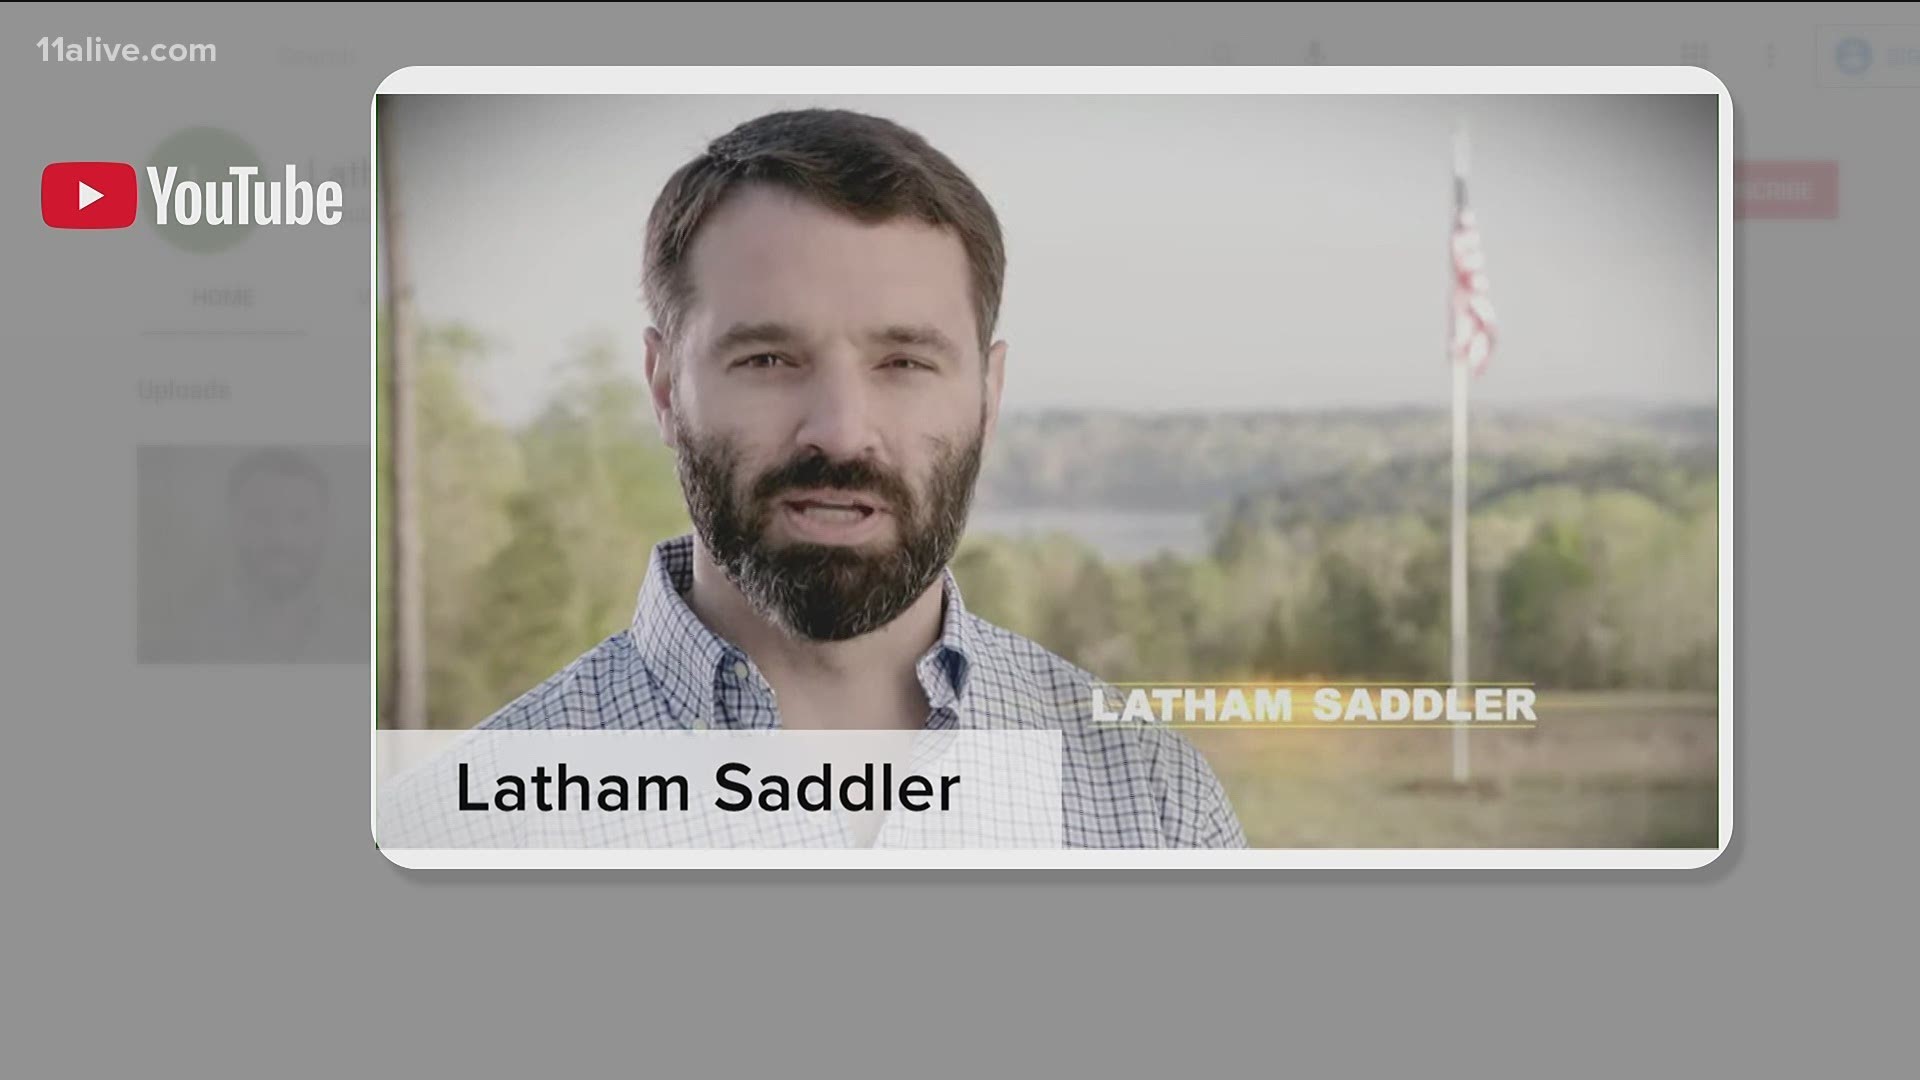 Saddler is a University of Georgia graduate who was Director of Intelligence Programs on the National Security Council for the Trump White House.